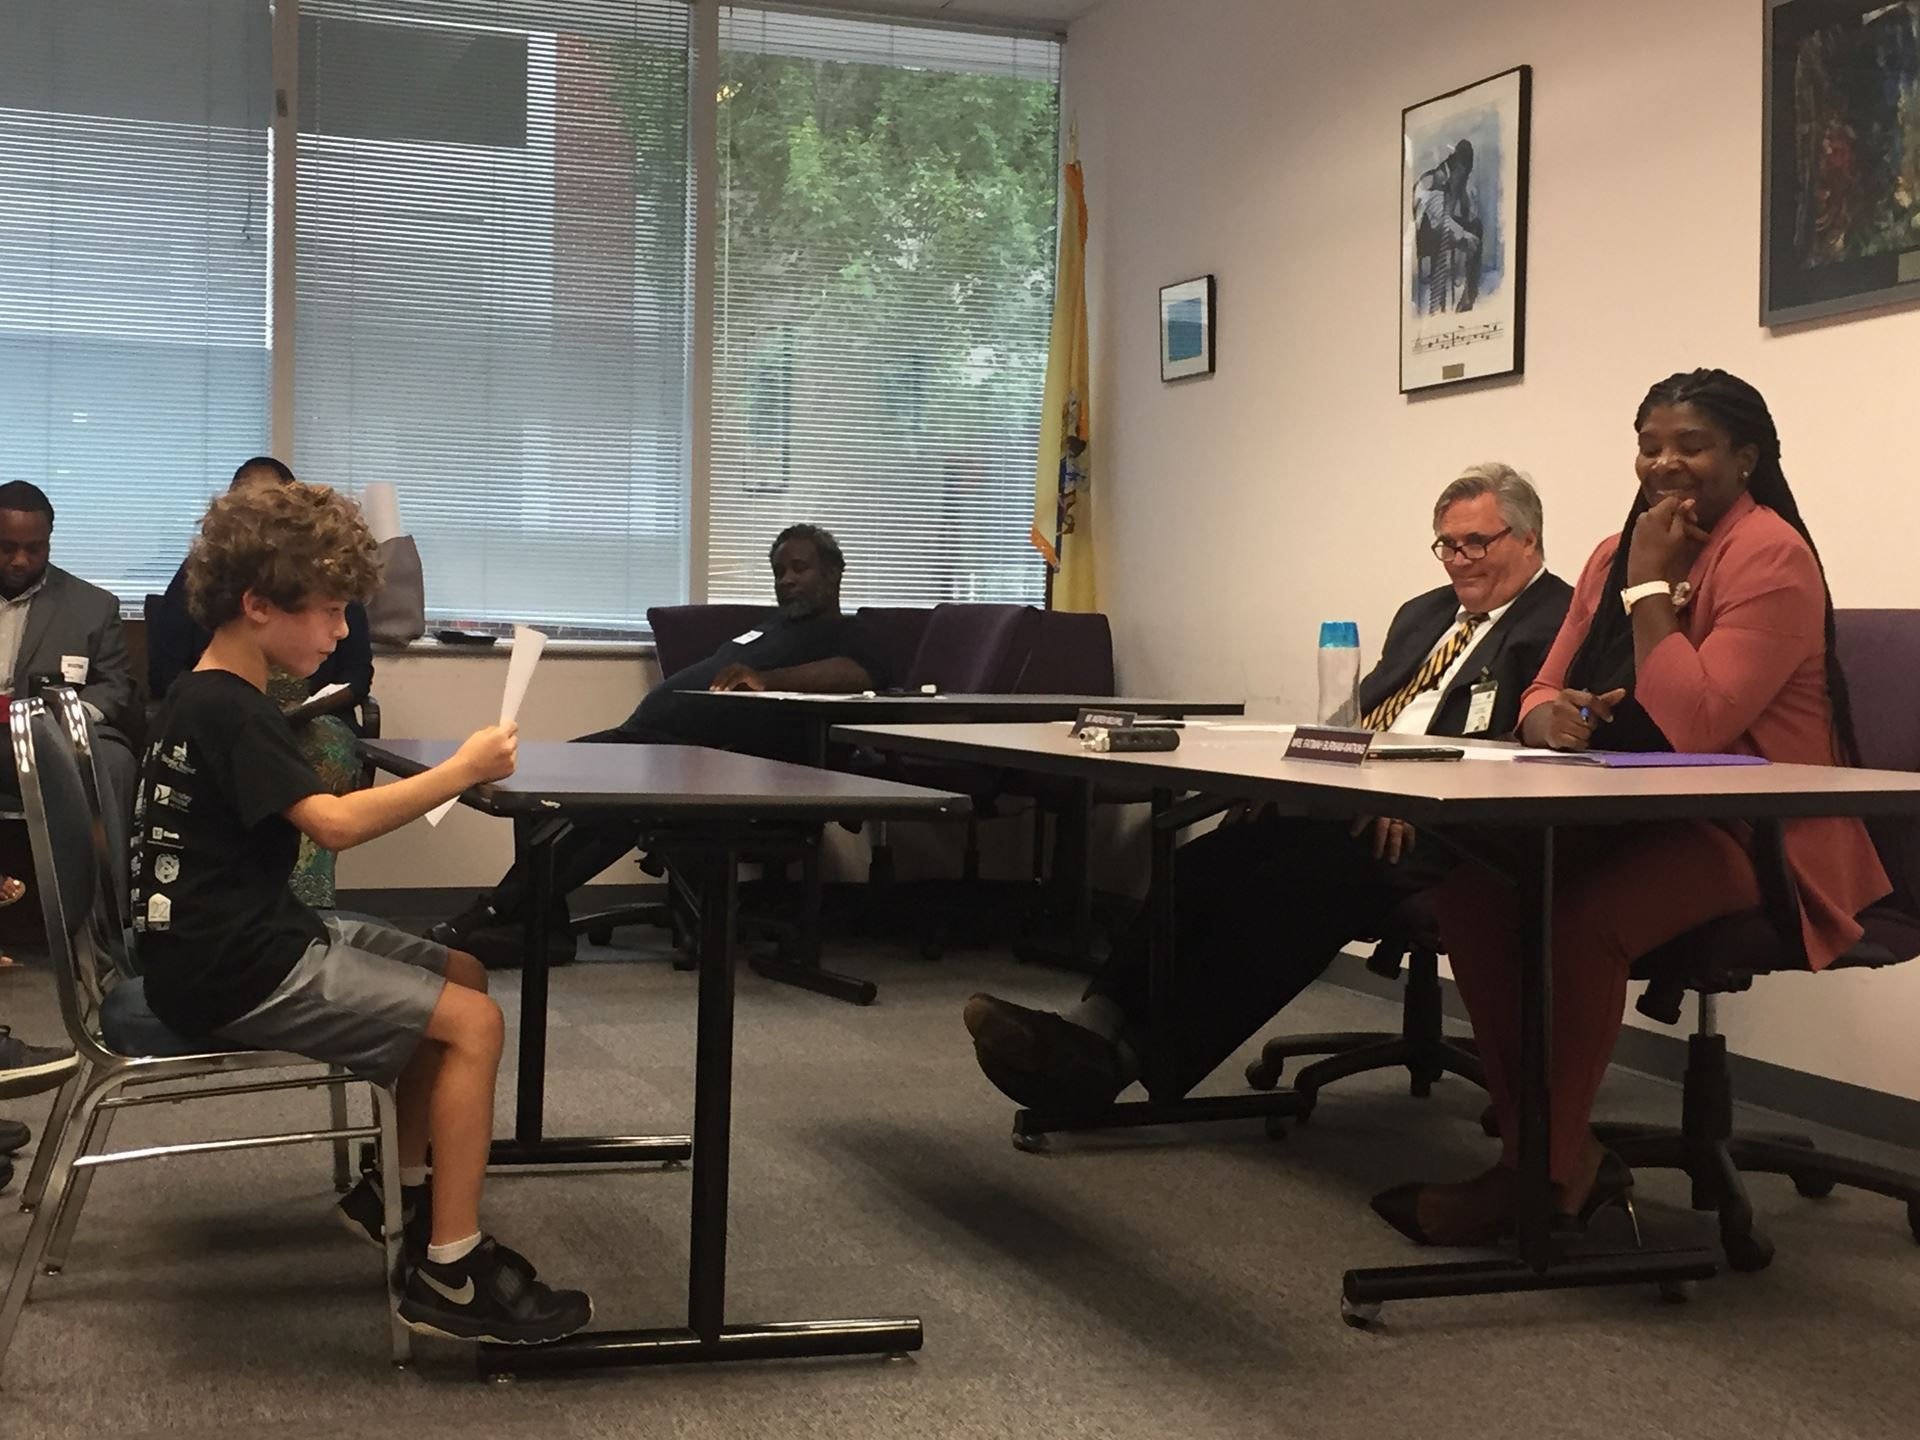 September 4 - NJ Parent, Jen Park and her son testified before the NJ State Board of Education during their open public testimony session on the value of and need for school library media specialists.